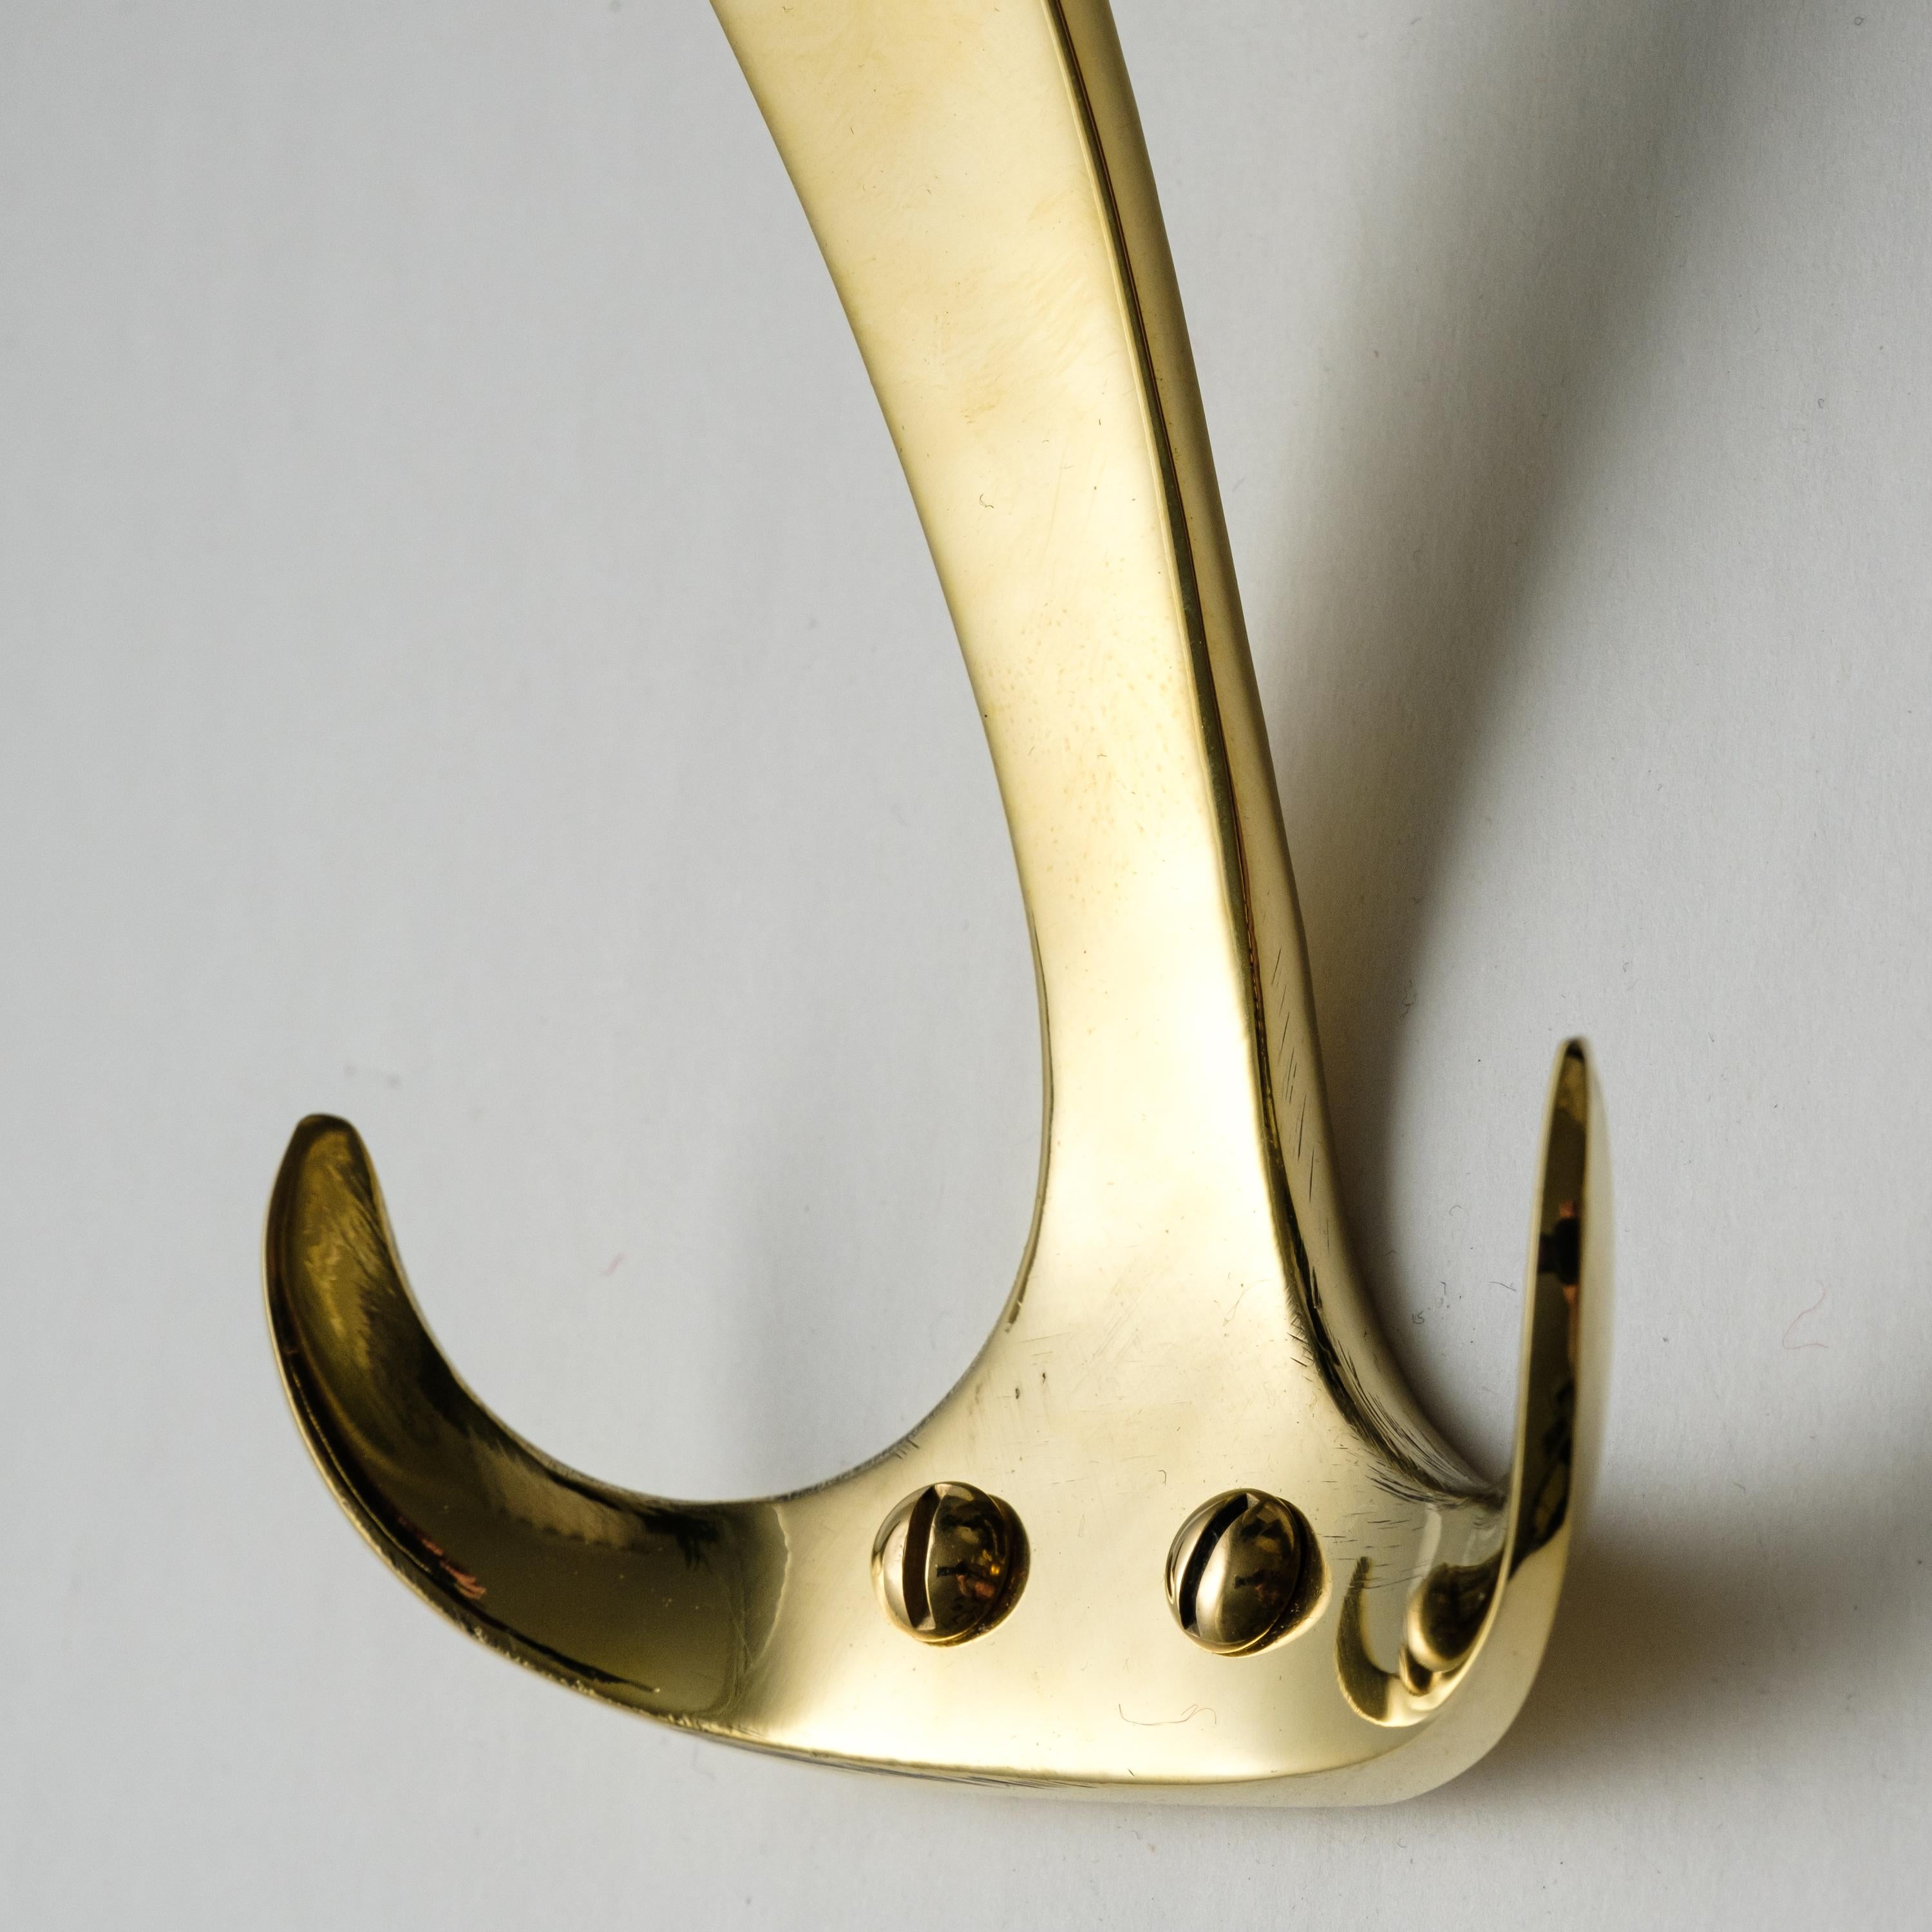 Carl Auböck model #4982 polished brass hook. Designed in the 1950s, this versatile and minimalist Viennese hook is executed in polished brass by Werkstätte Carl Auböck, Austria. 

Produced by Carl Auböck IV in the original Auböck workshop in the 7th